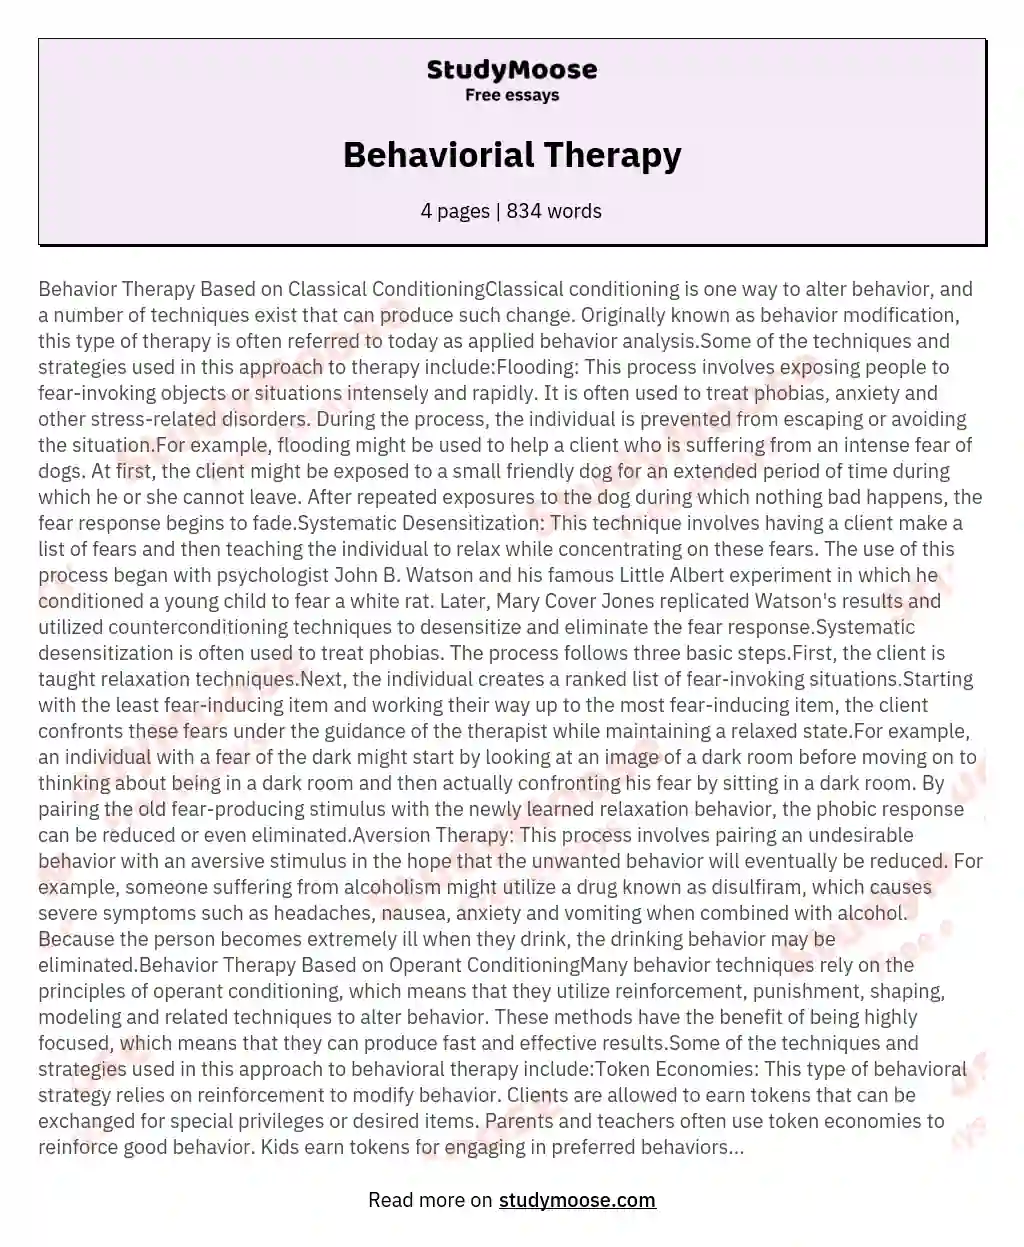 Behavior Therapy Based on Classical and Operant Conditioning essay